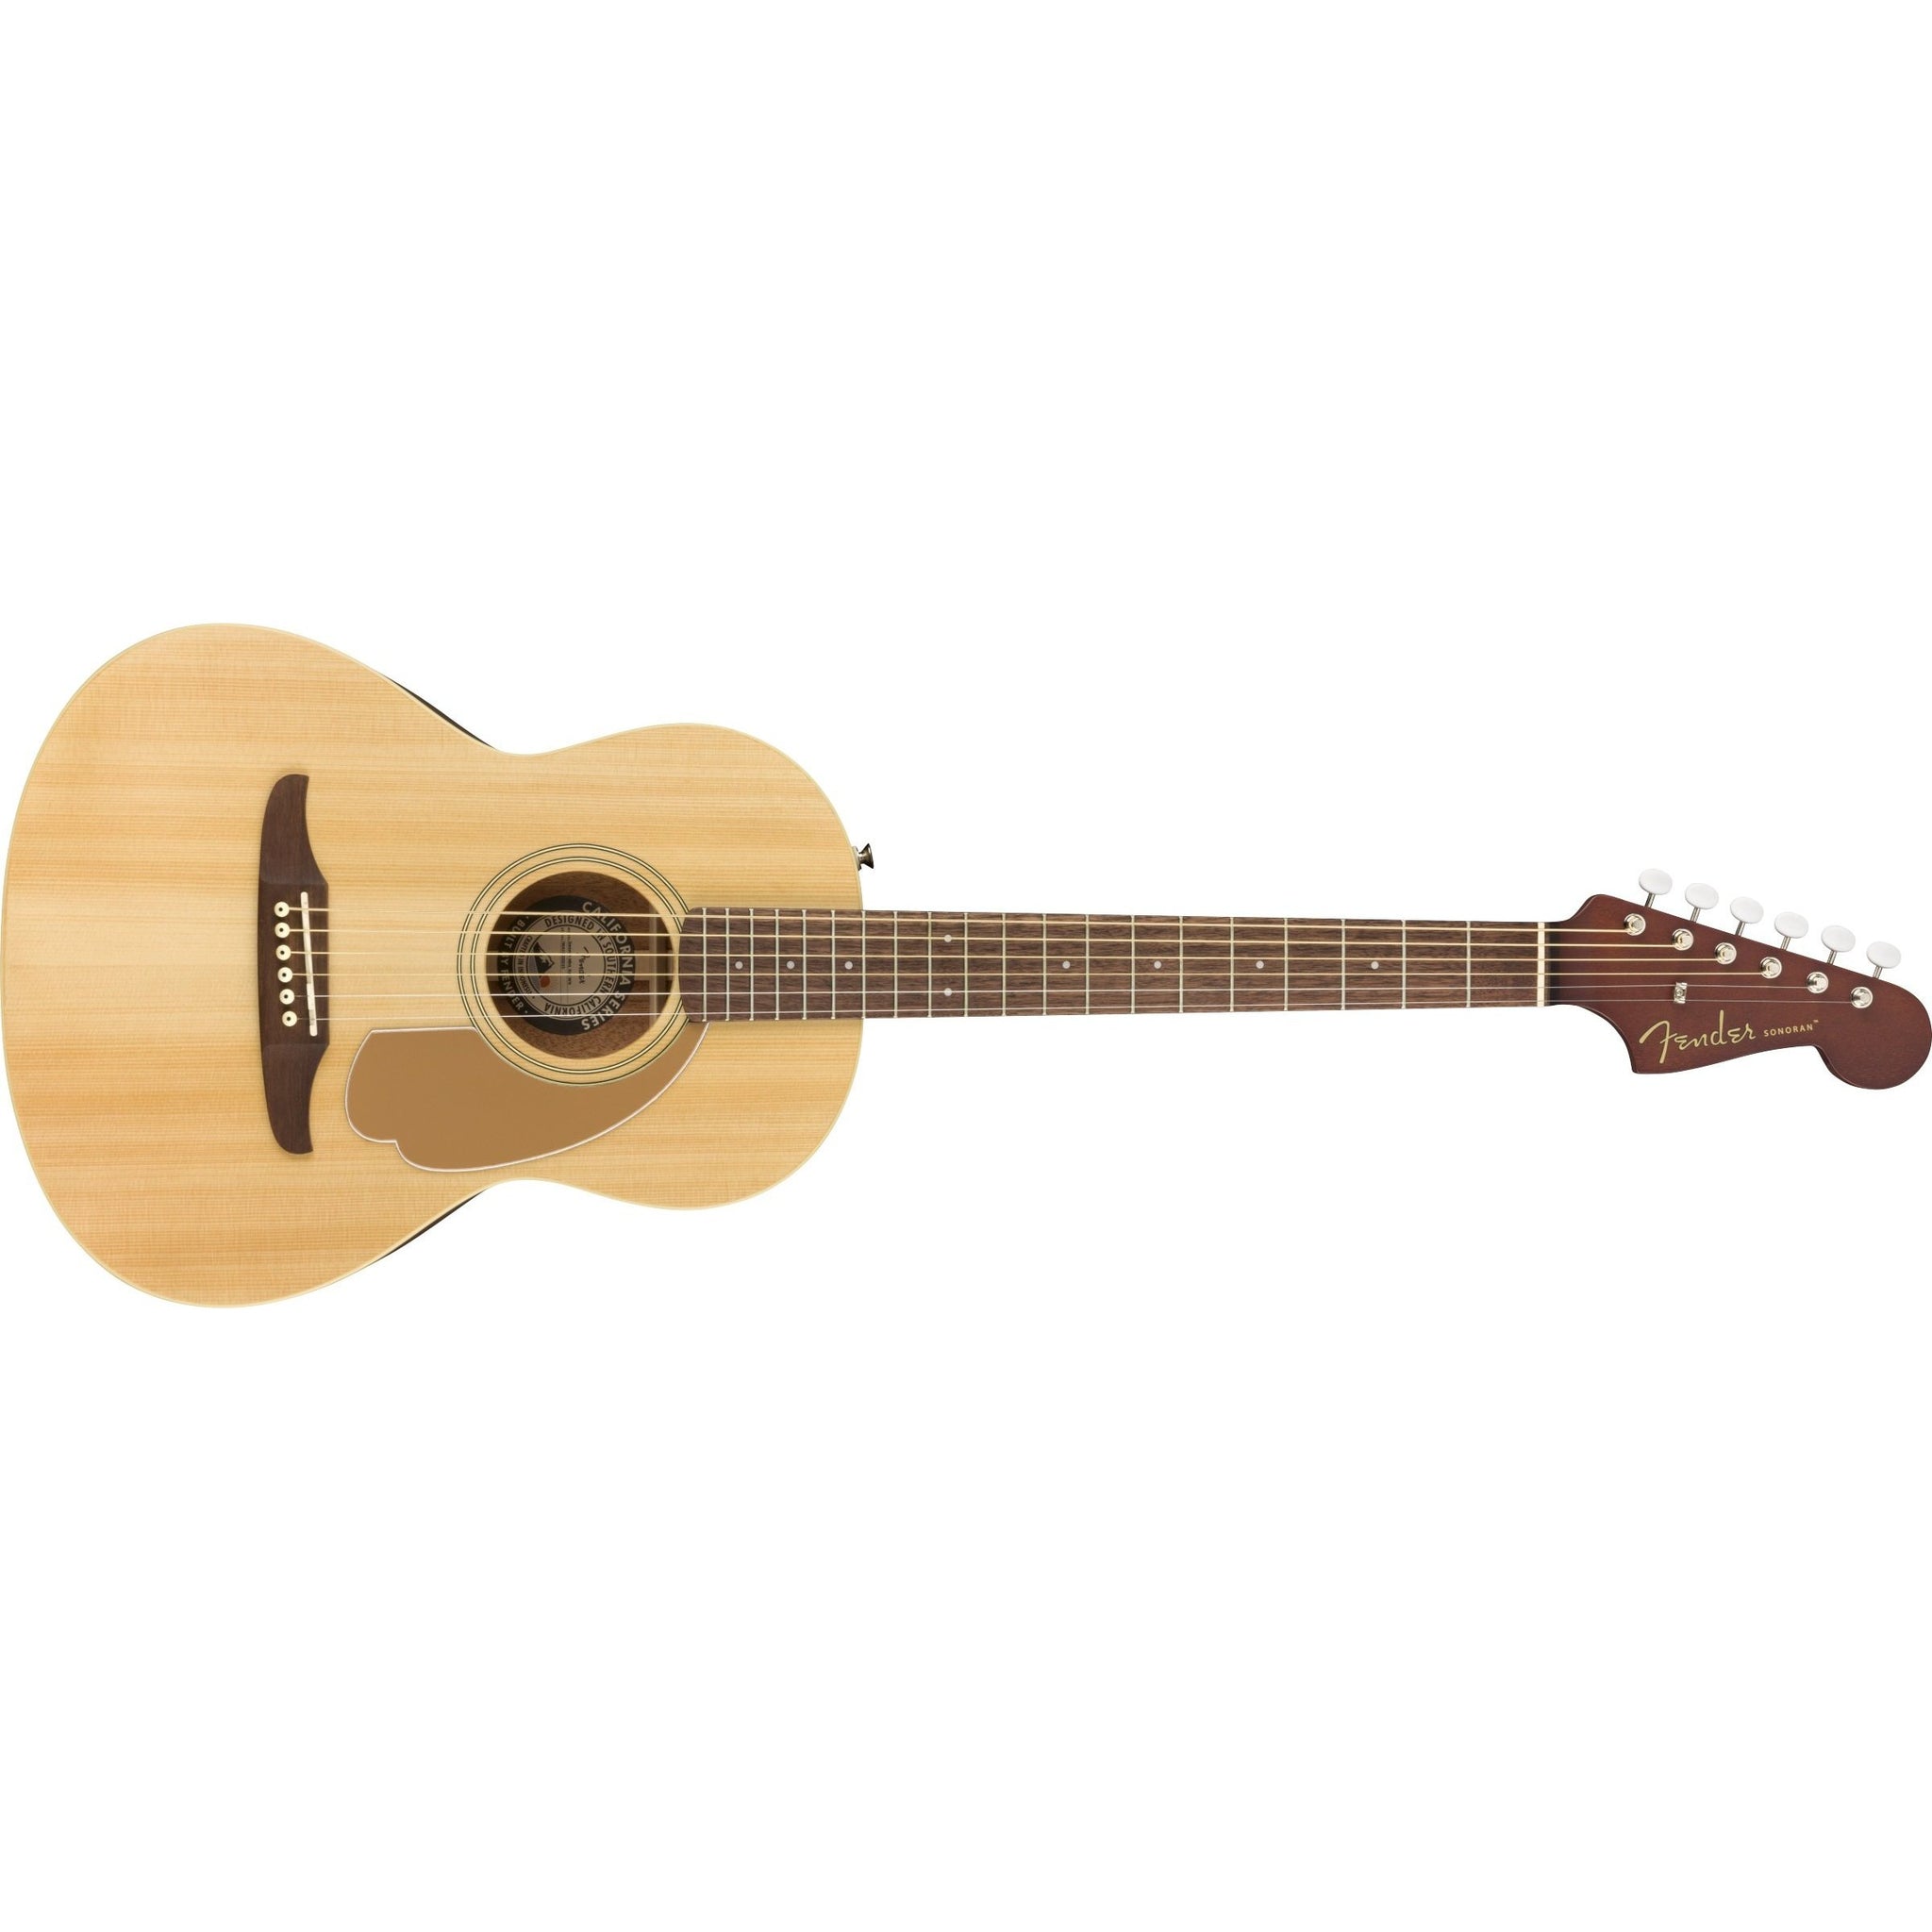 Fender Sonoran Mini Acoustic Guitar with Gig Bag-Natural-Music World Academy